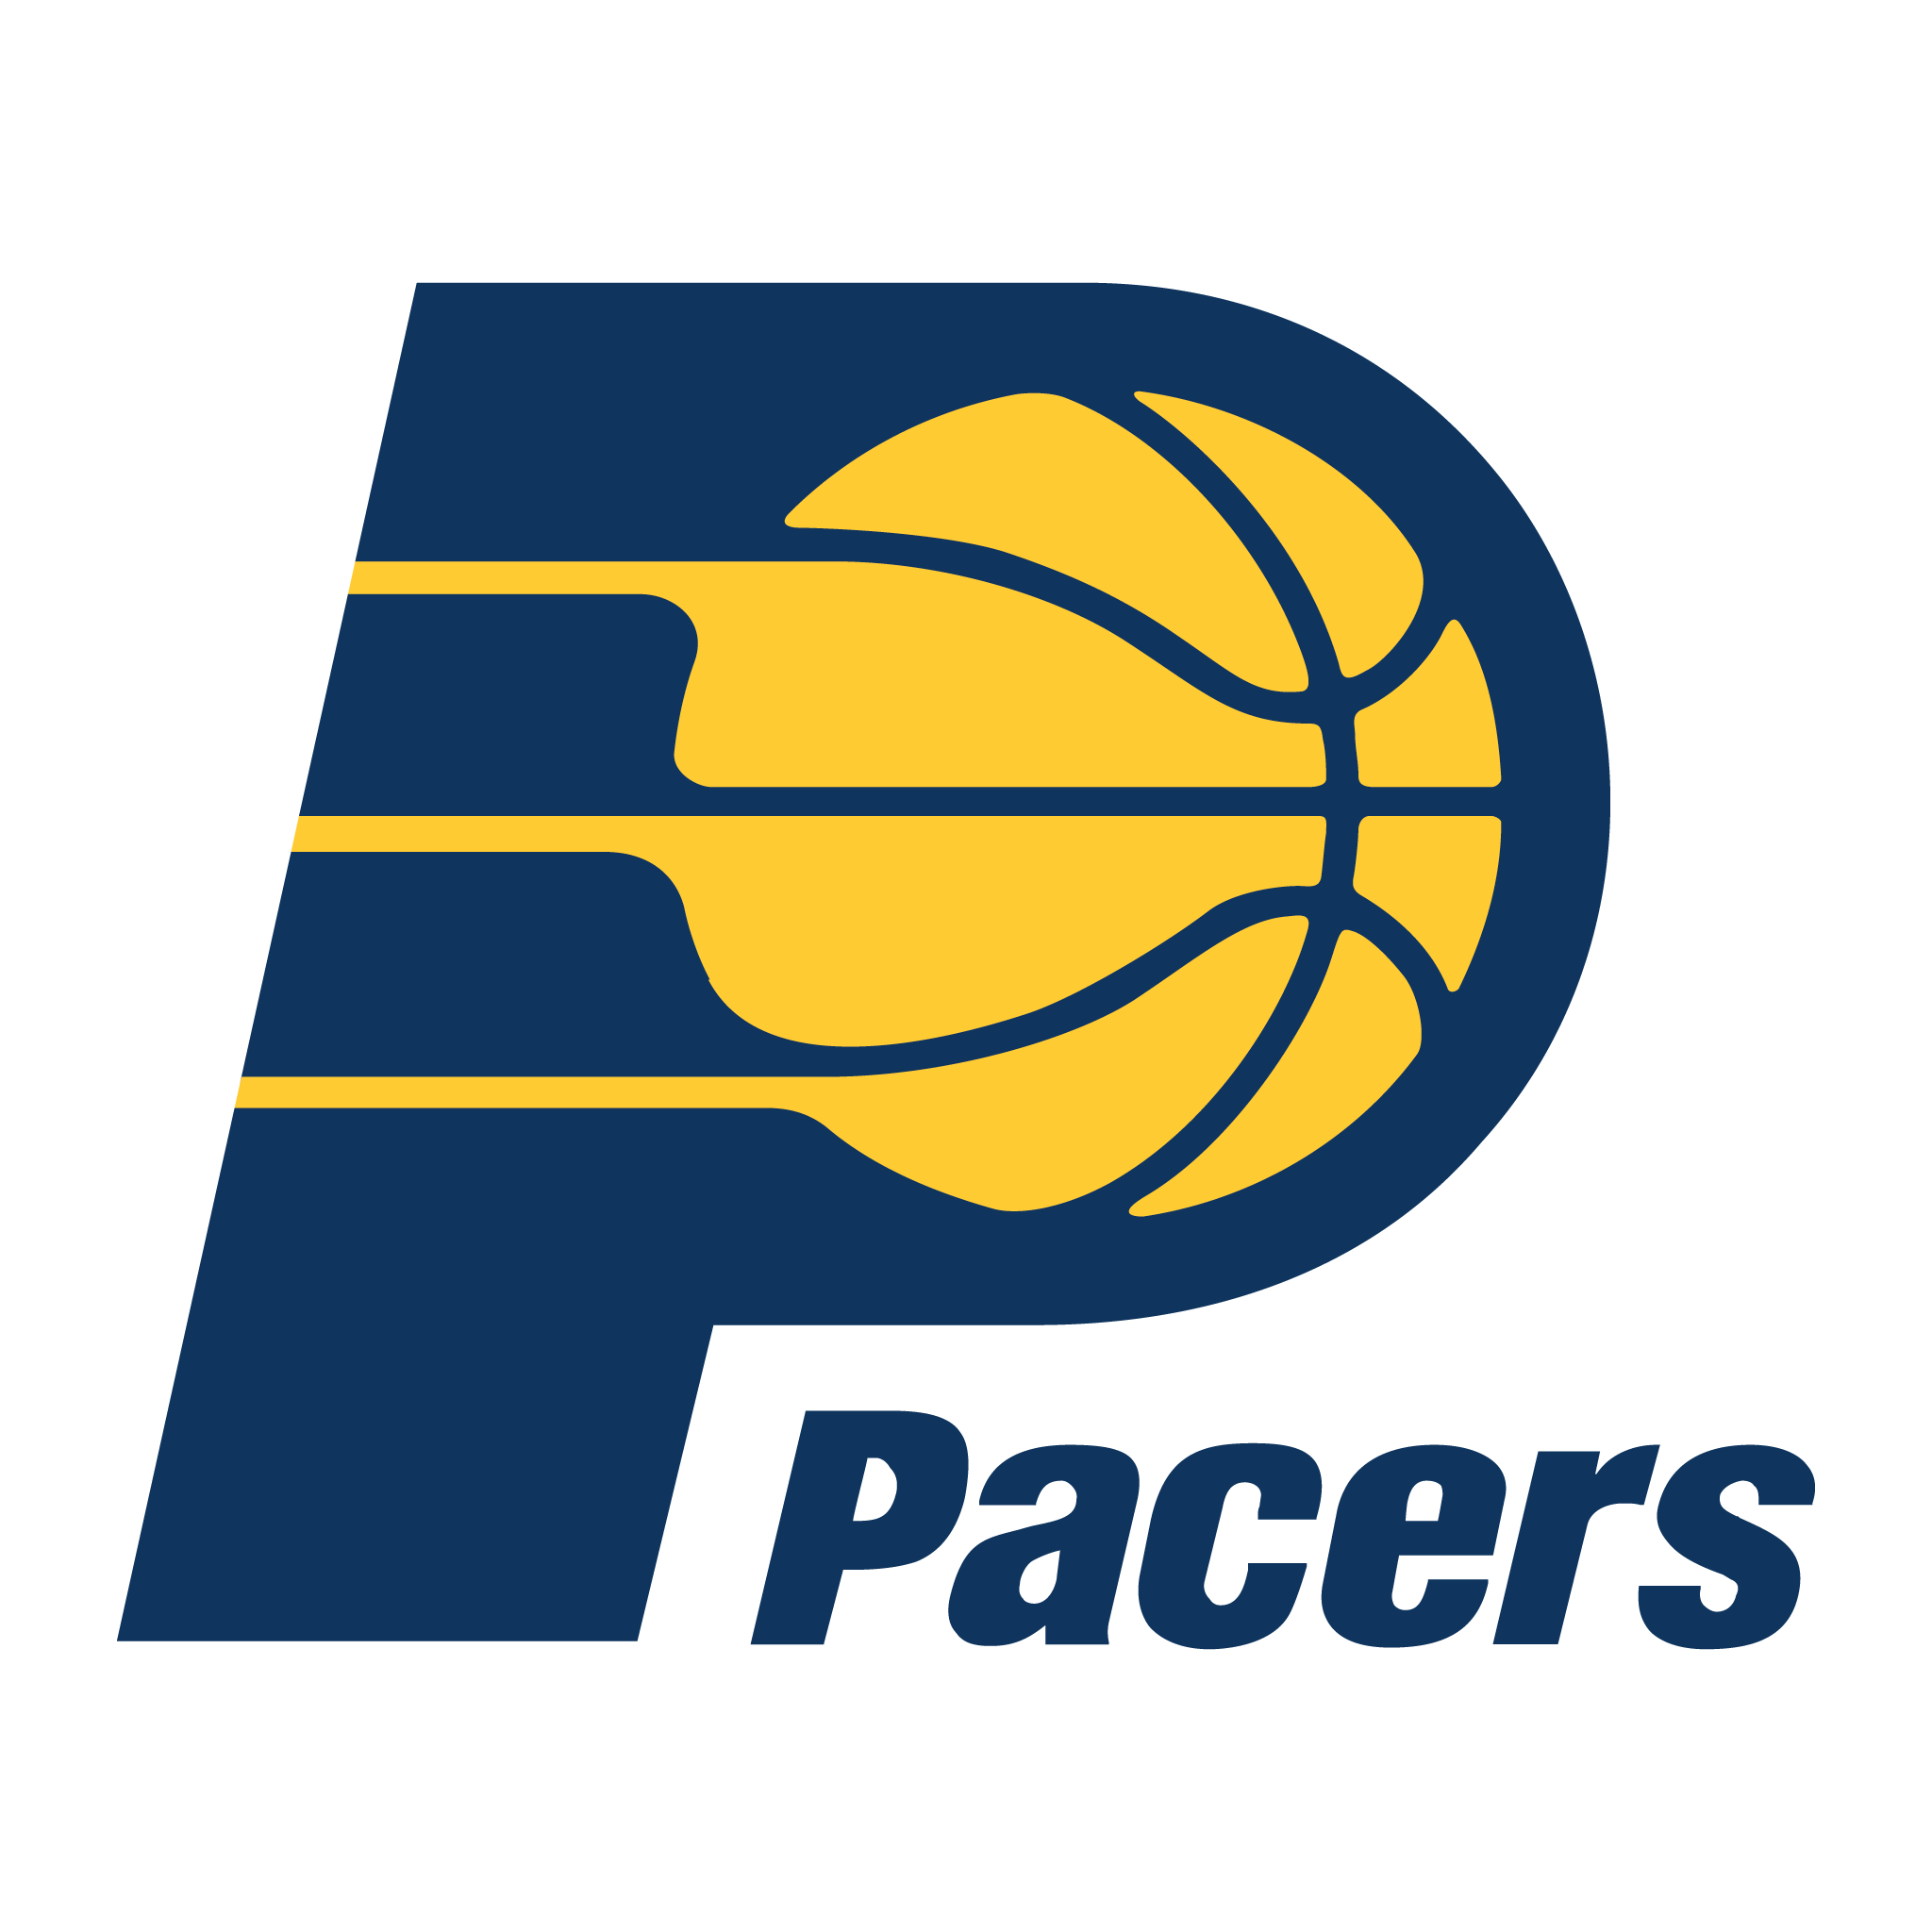 brasao do indiana pacers